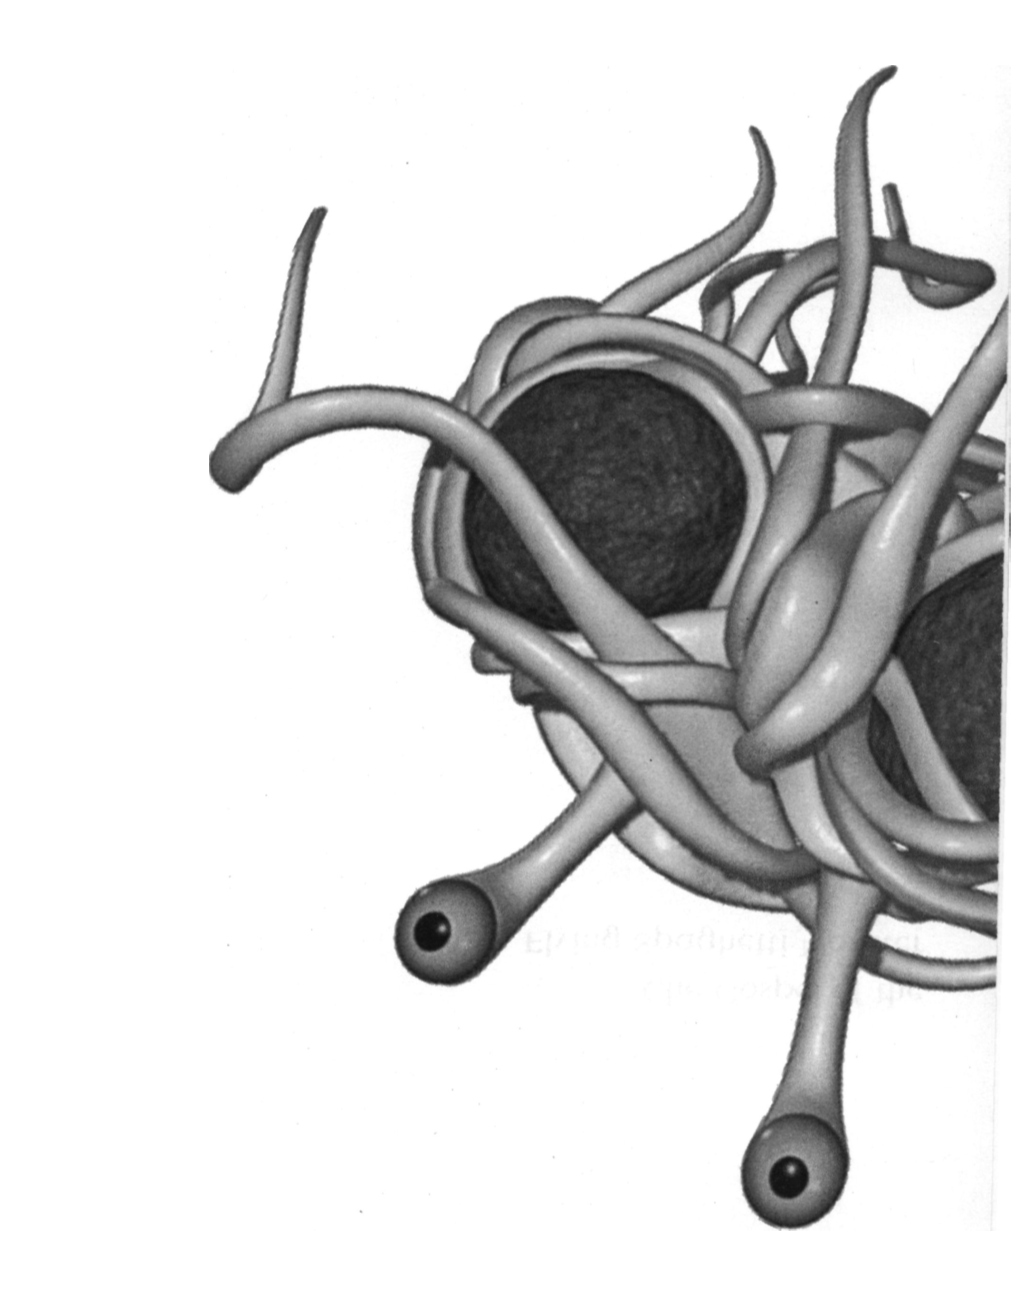 FLYING SPAGHETTI MONSTERISM Have You Been Touched by His Noodly Appendage?